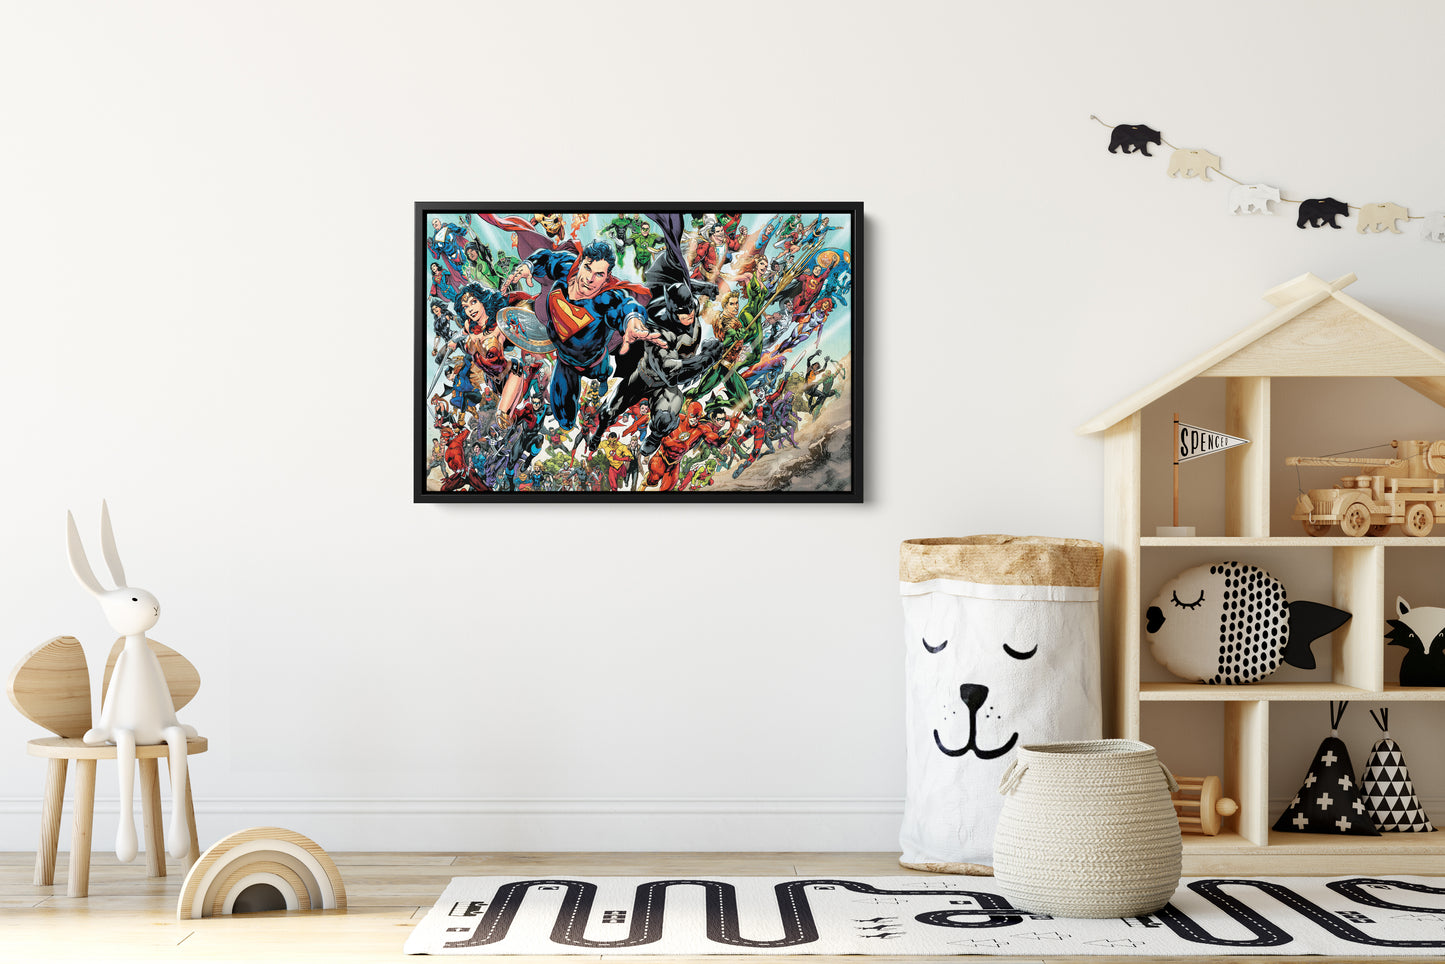 DC Superheroes  Universe Poster Comics Hand Made Posters Canvas Print Kids Gift Wall Art  Home Decor